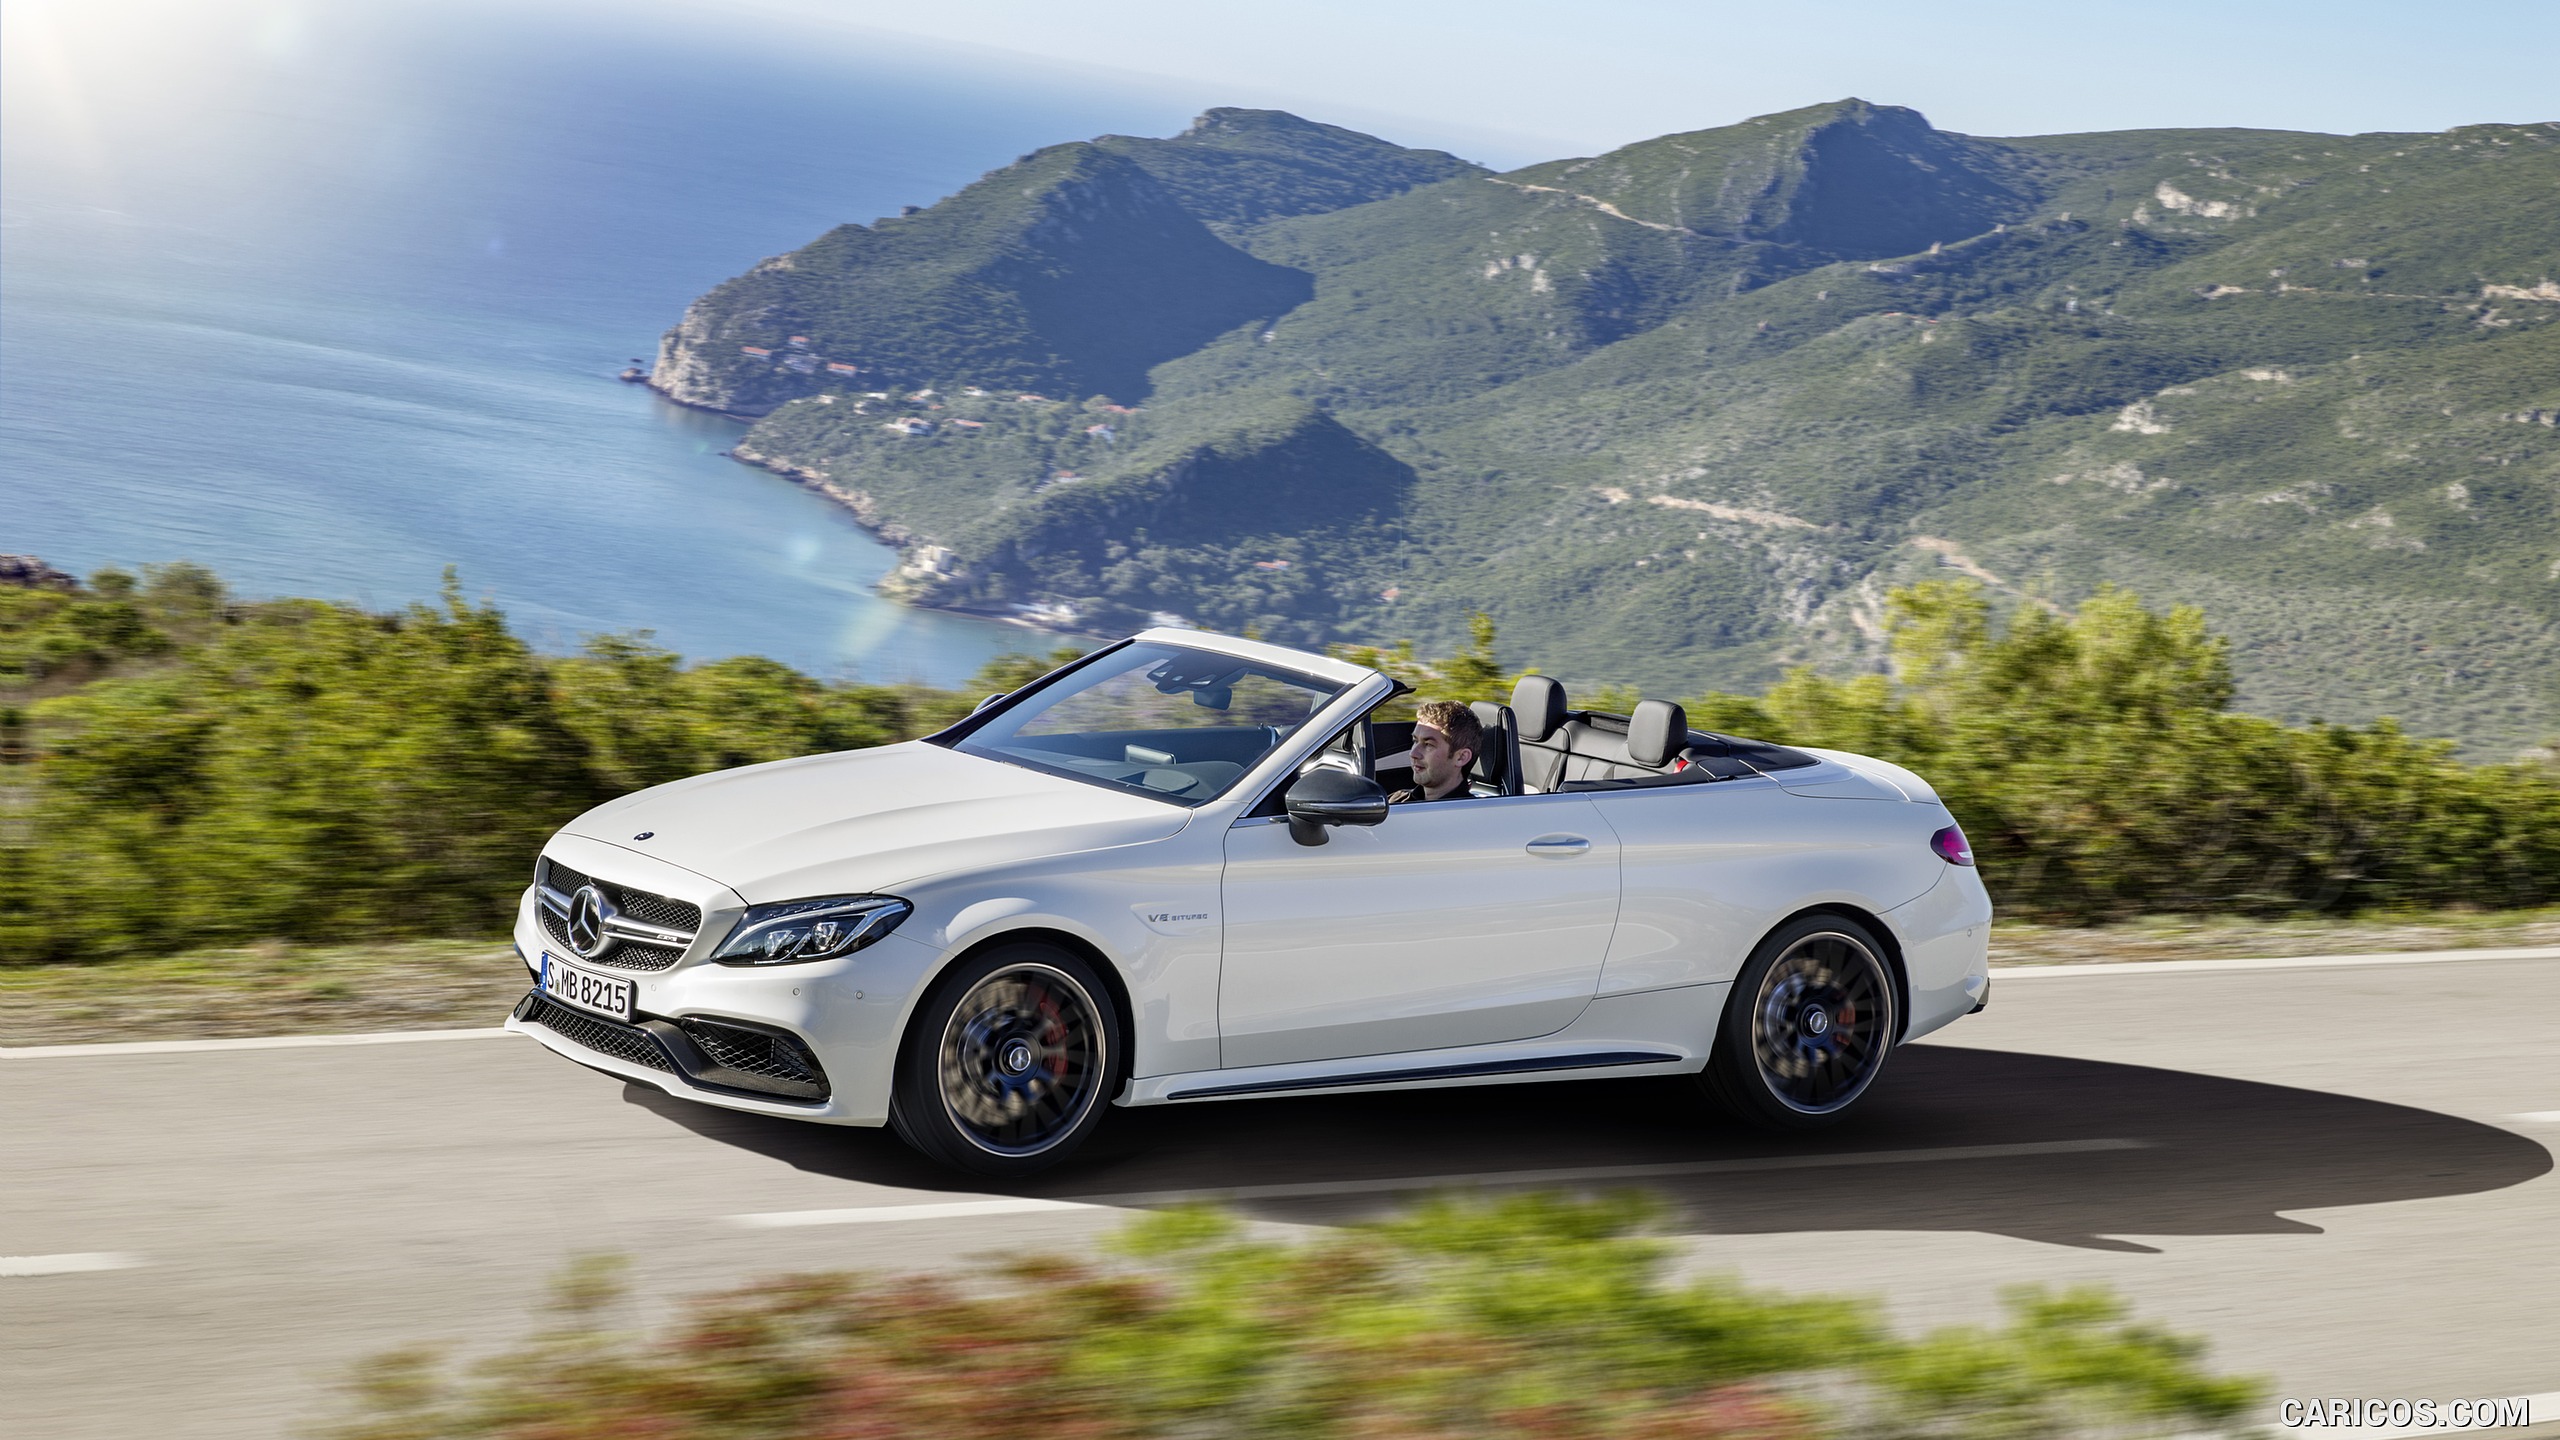 2017 Mercedes-AMG C63 S Cabriolet (Chassis: A205, Color: Designo Diamond White Bright) - Side, #13 of 222